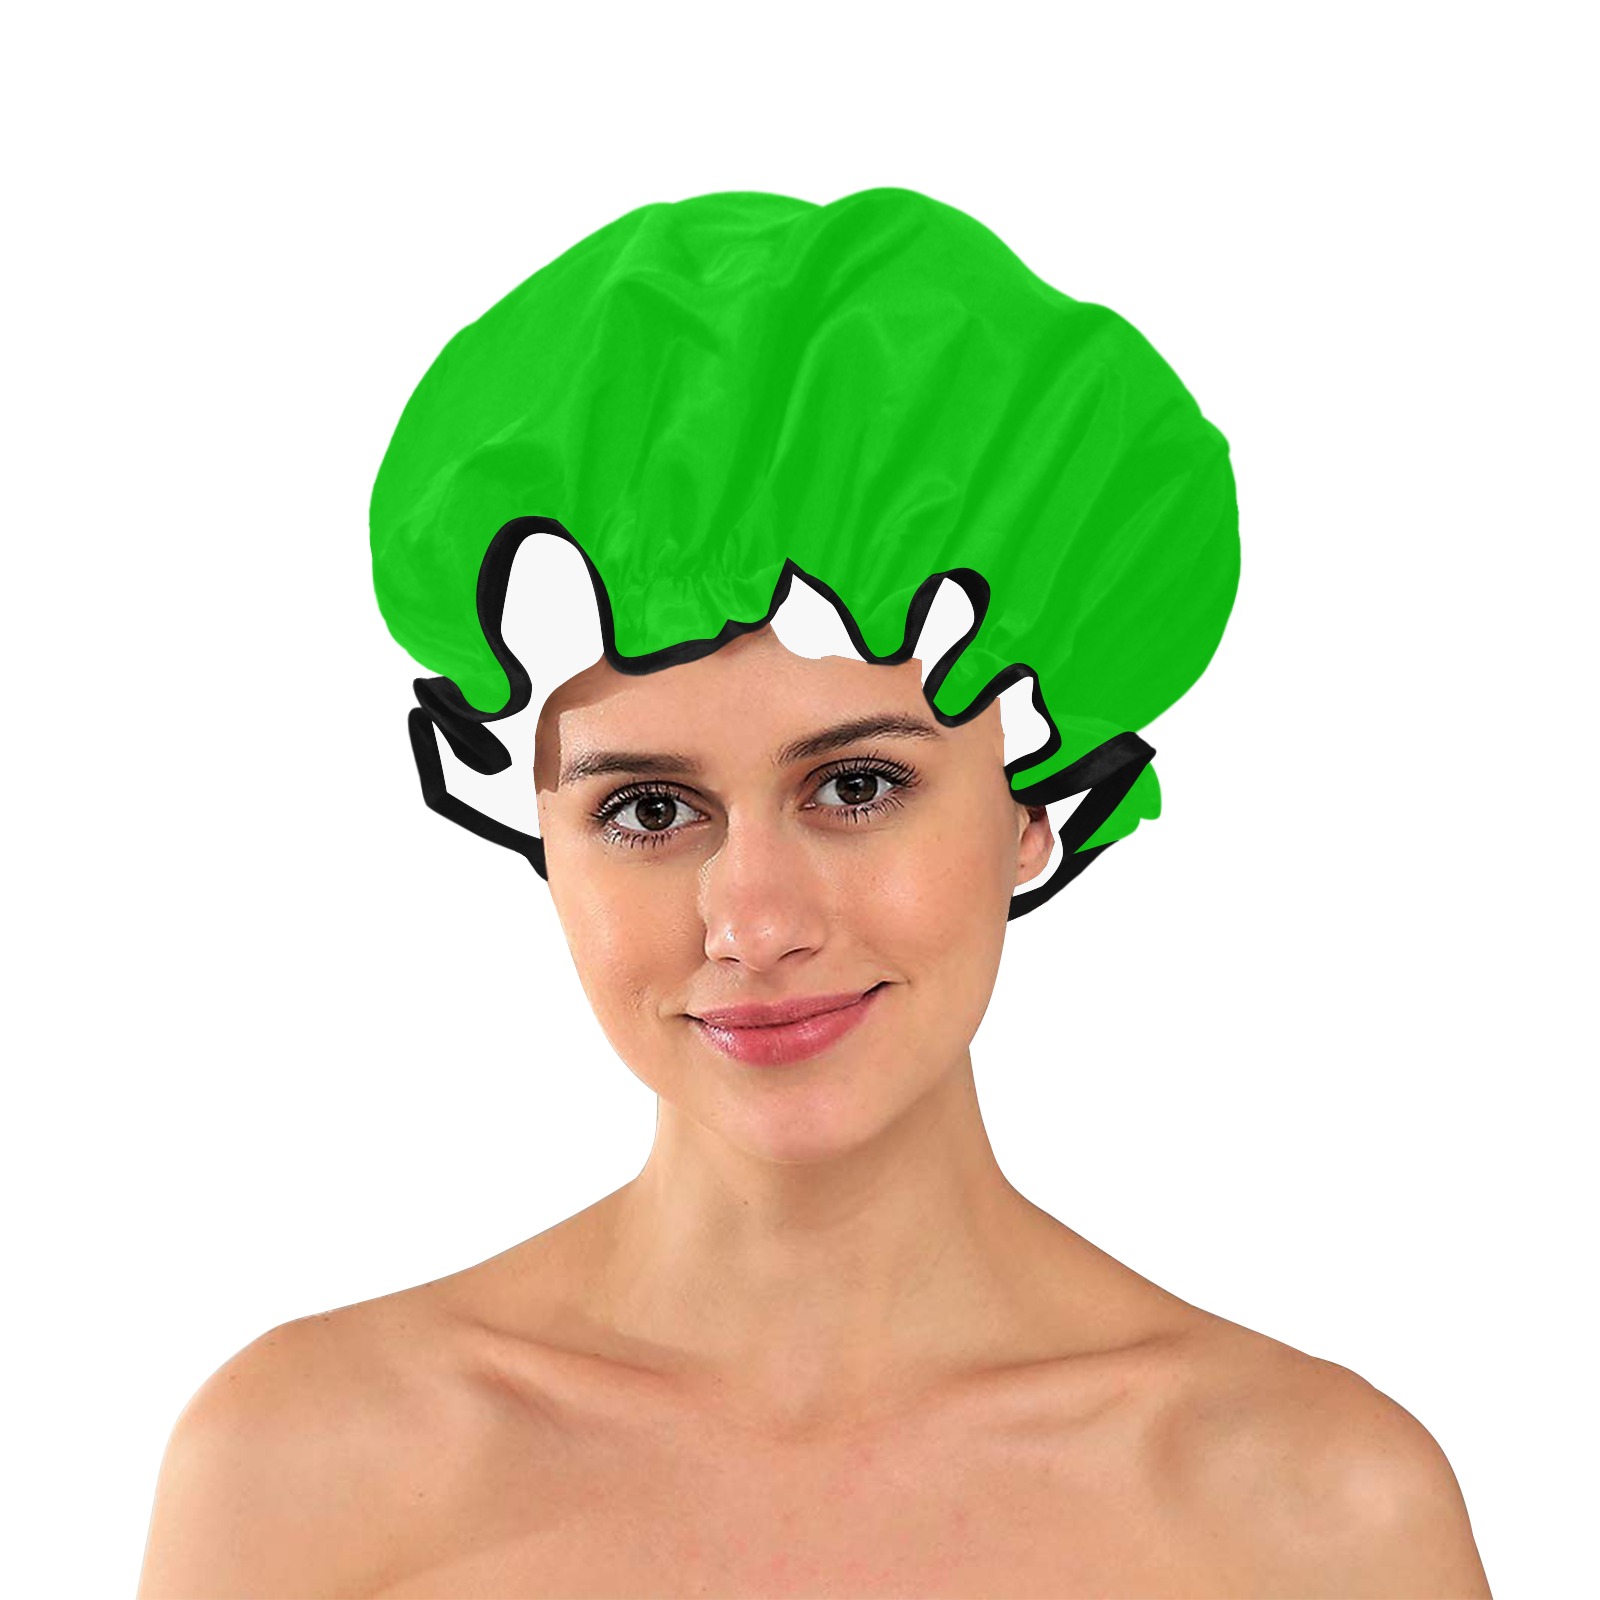 Merry Christmas Green Solid Color Shower Cap